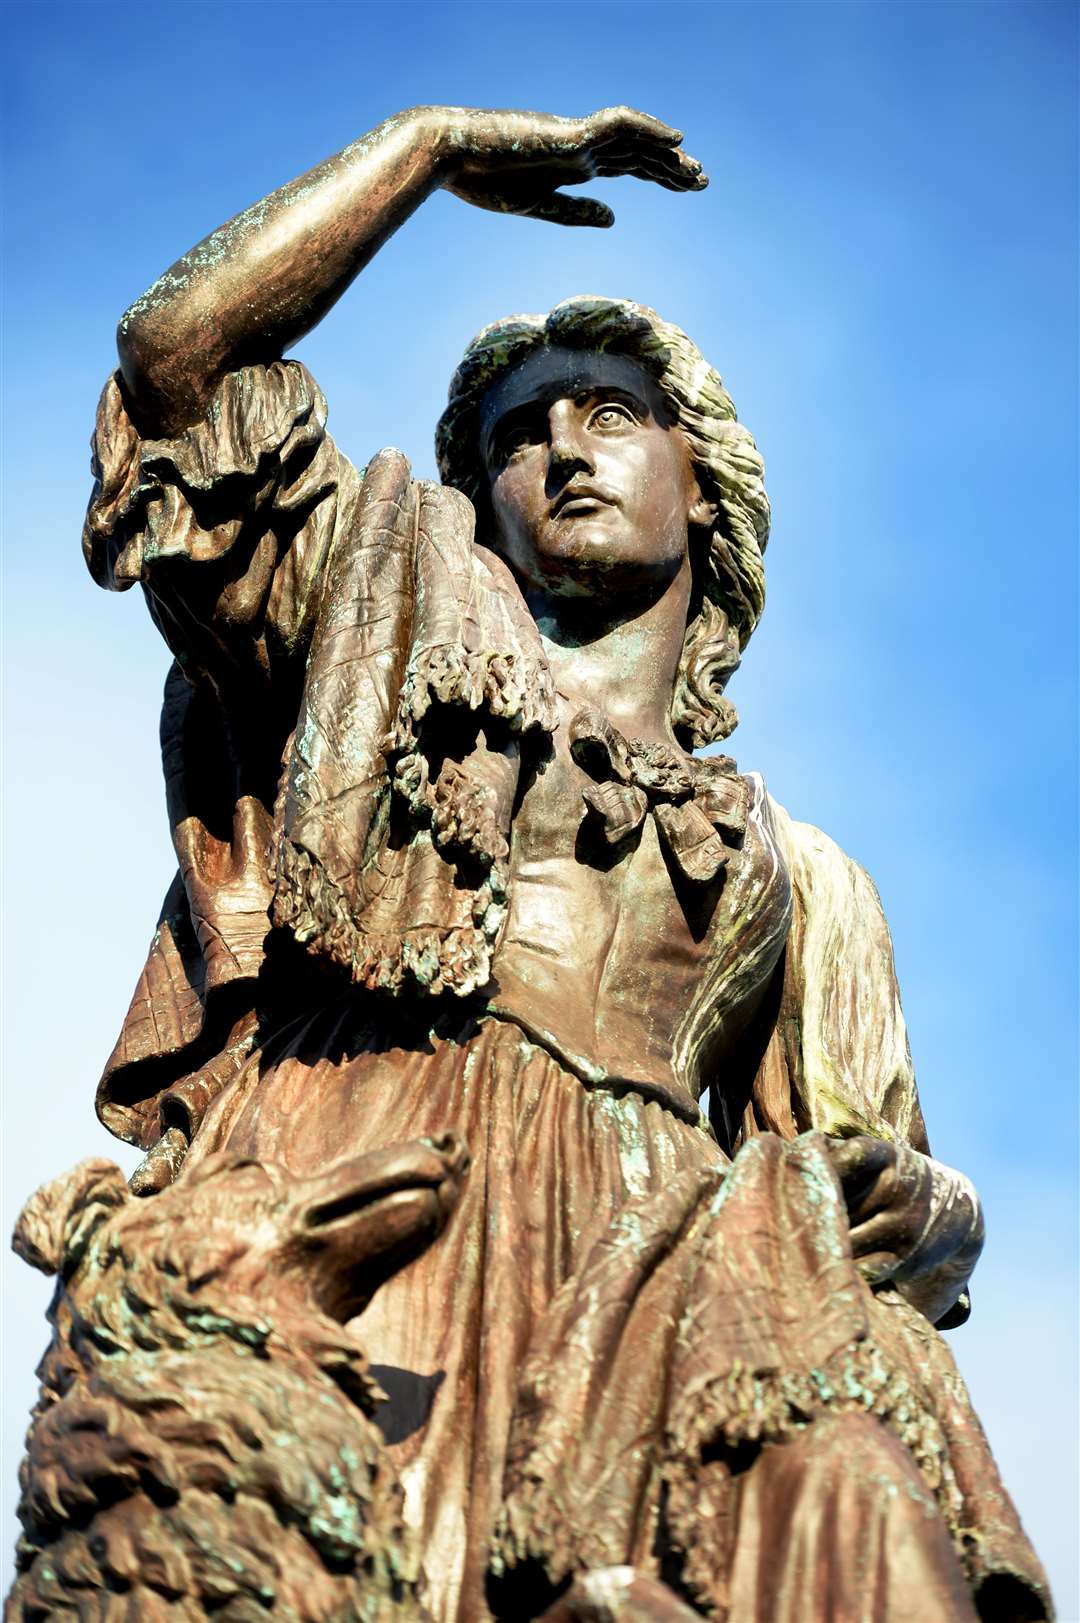 The statue of Flora Macdonald at Inverness Castle.